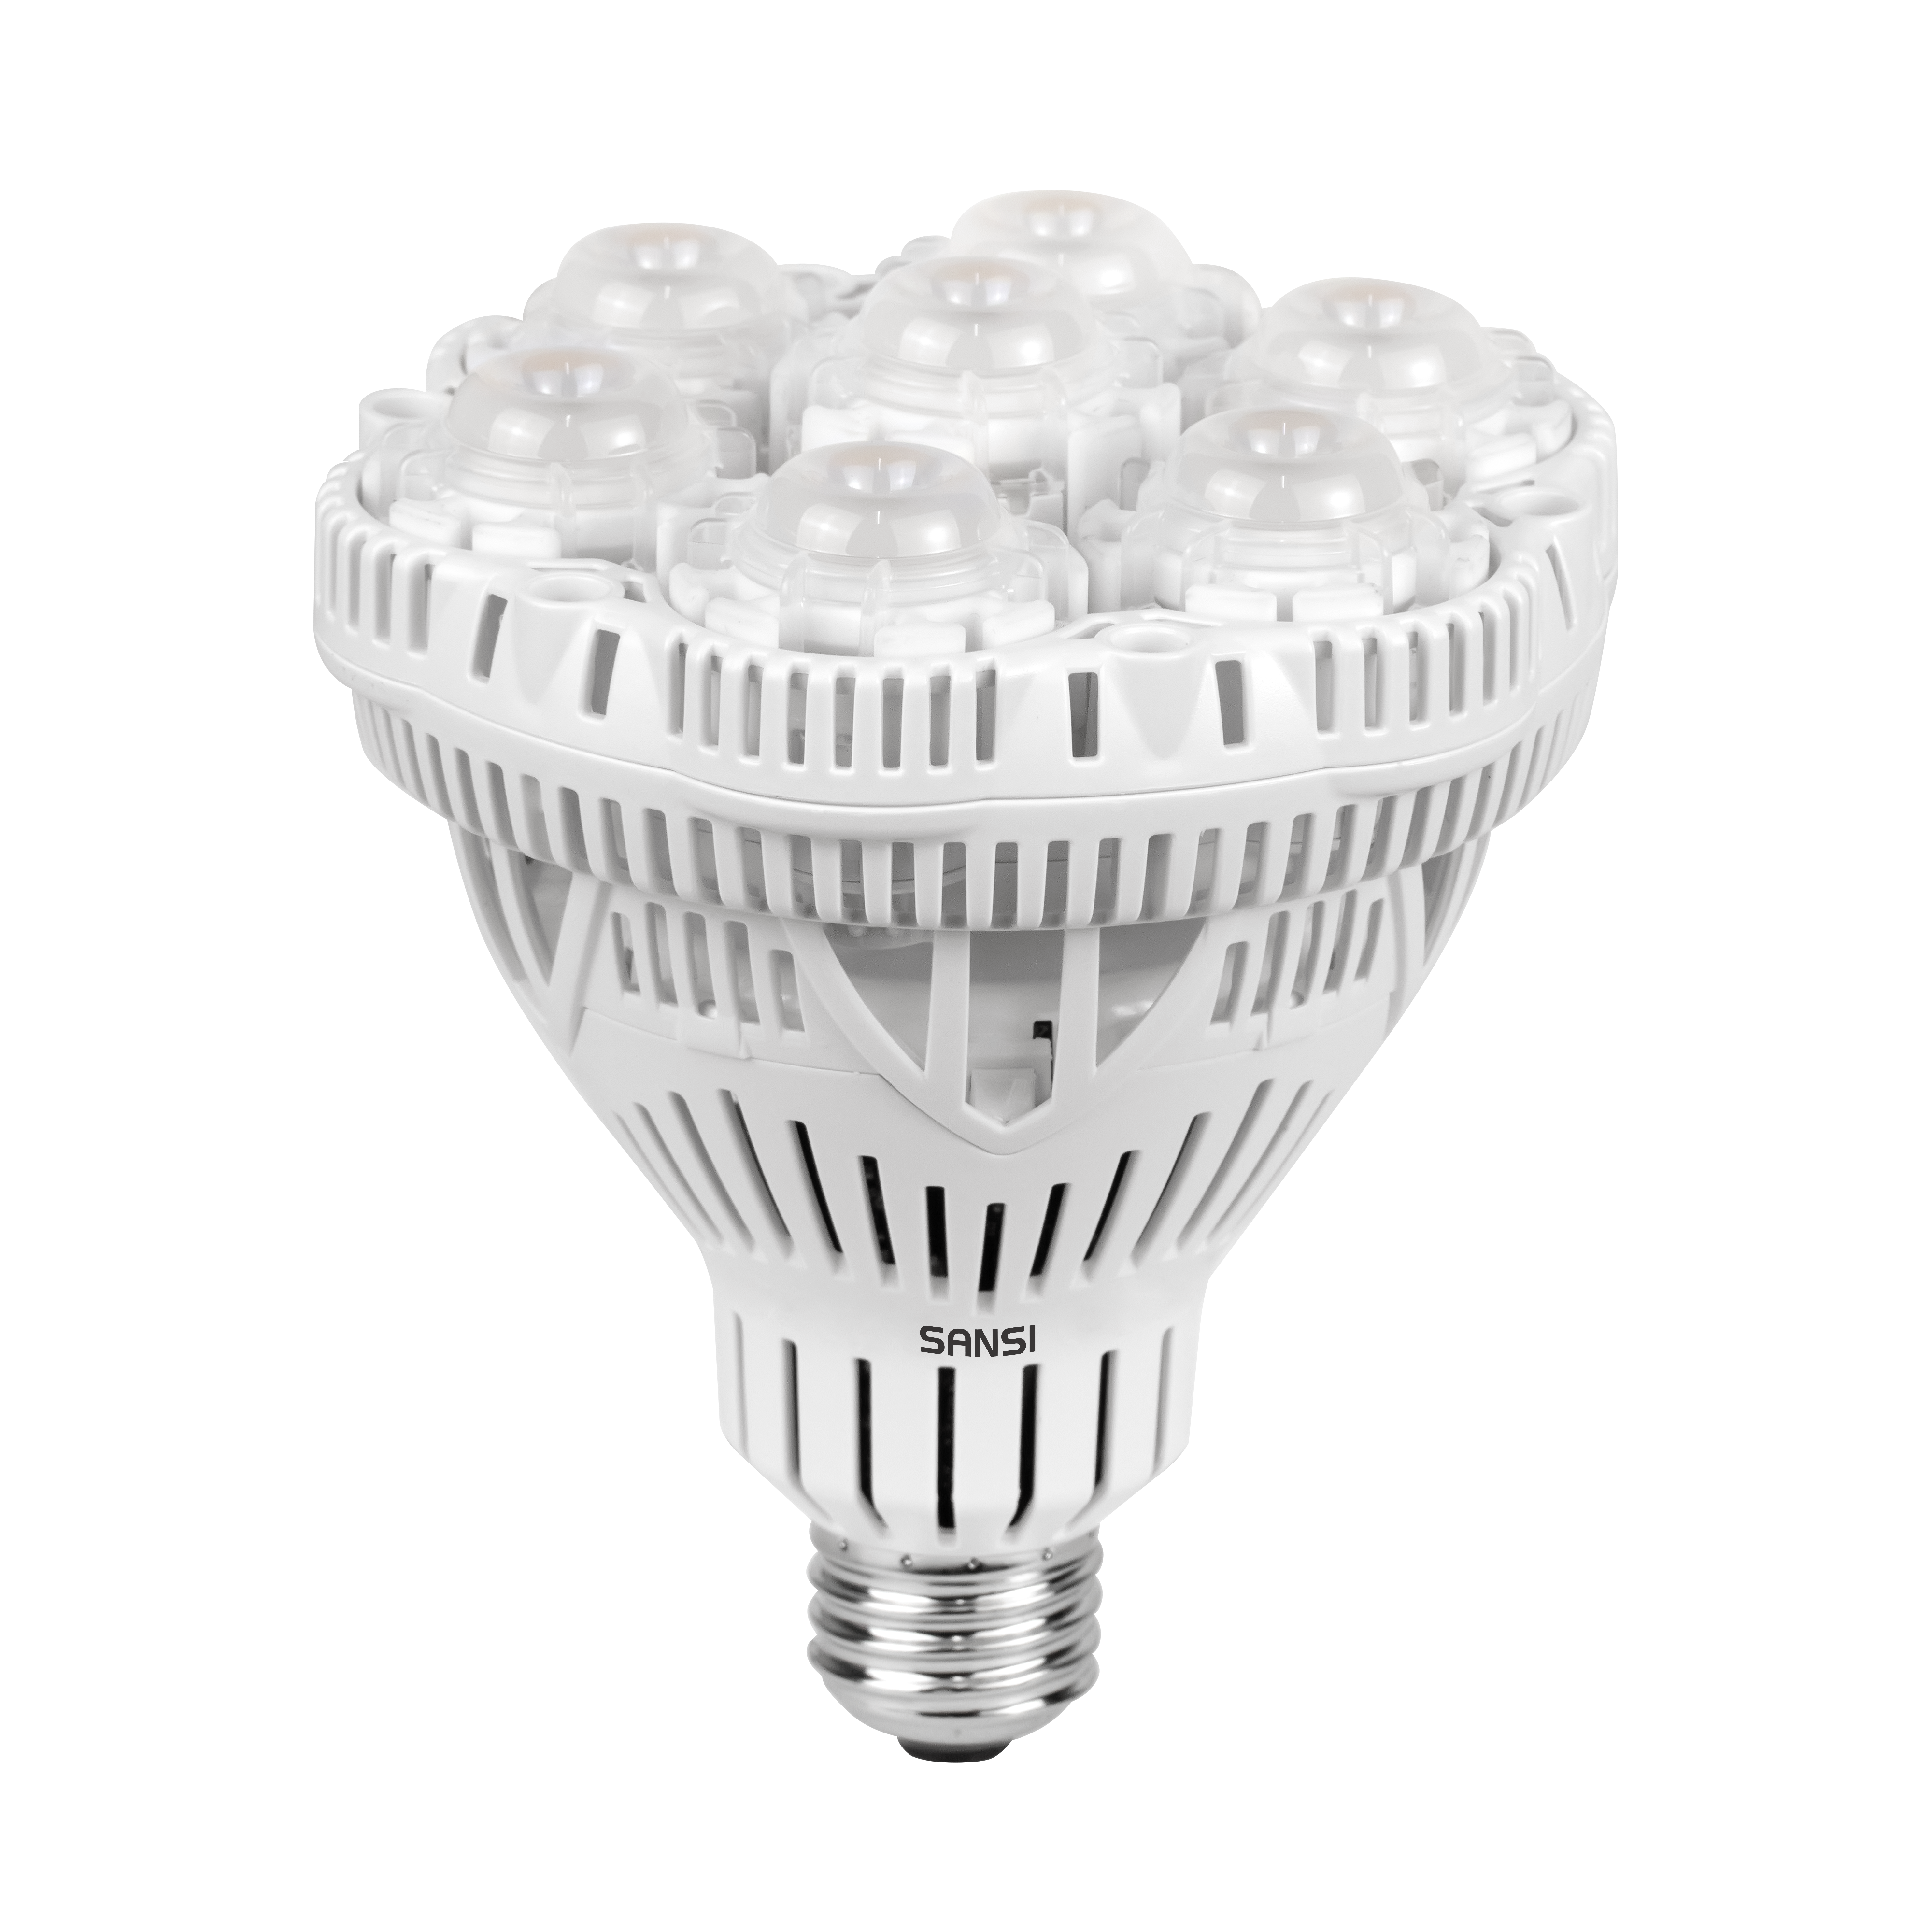 36W LED Grow Light Bulb Indoor Plants Growing, Seeding, is suitable for all the stages plants growing,